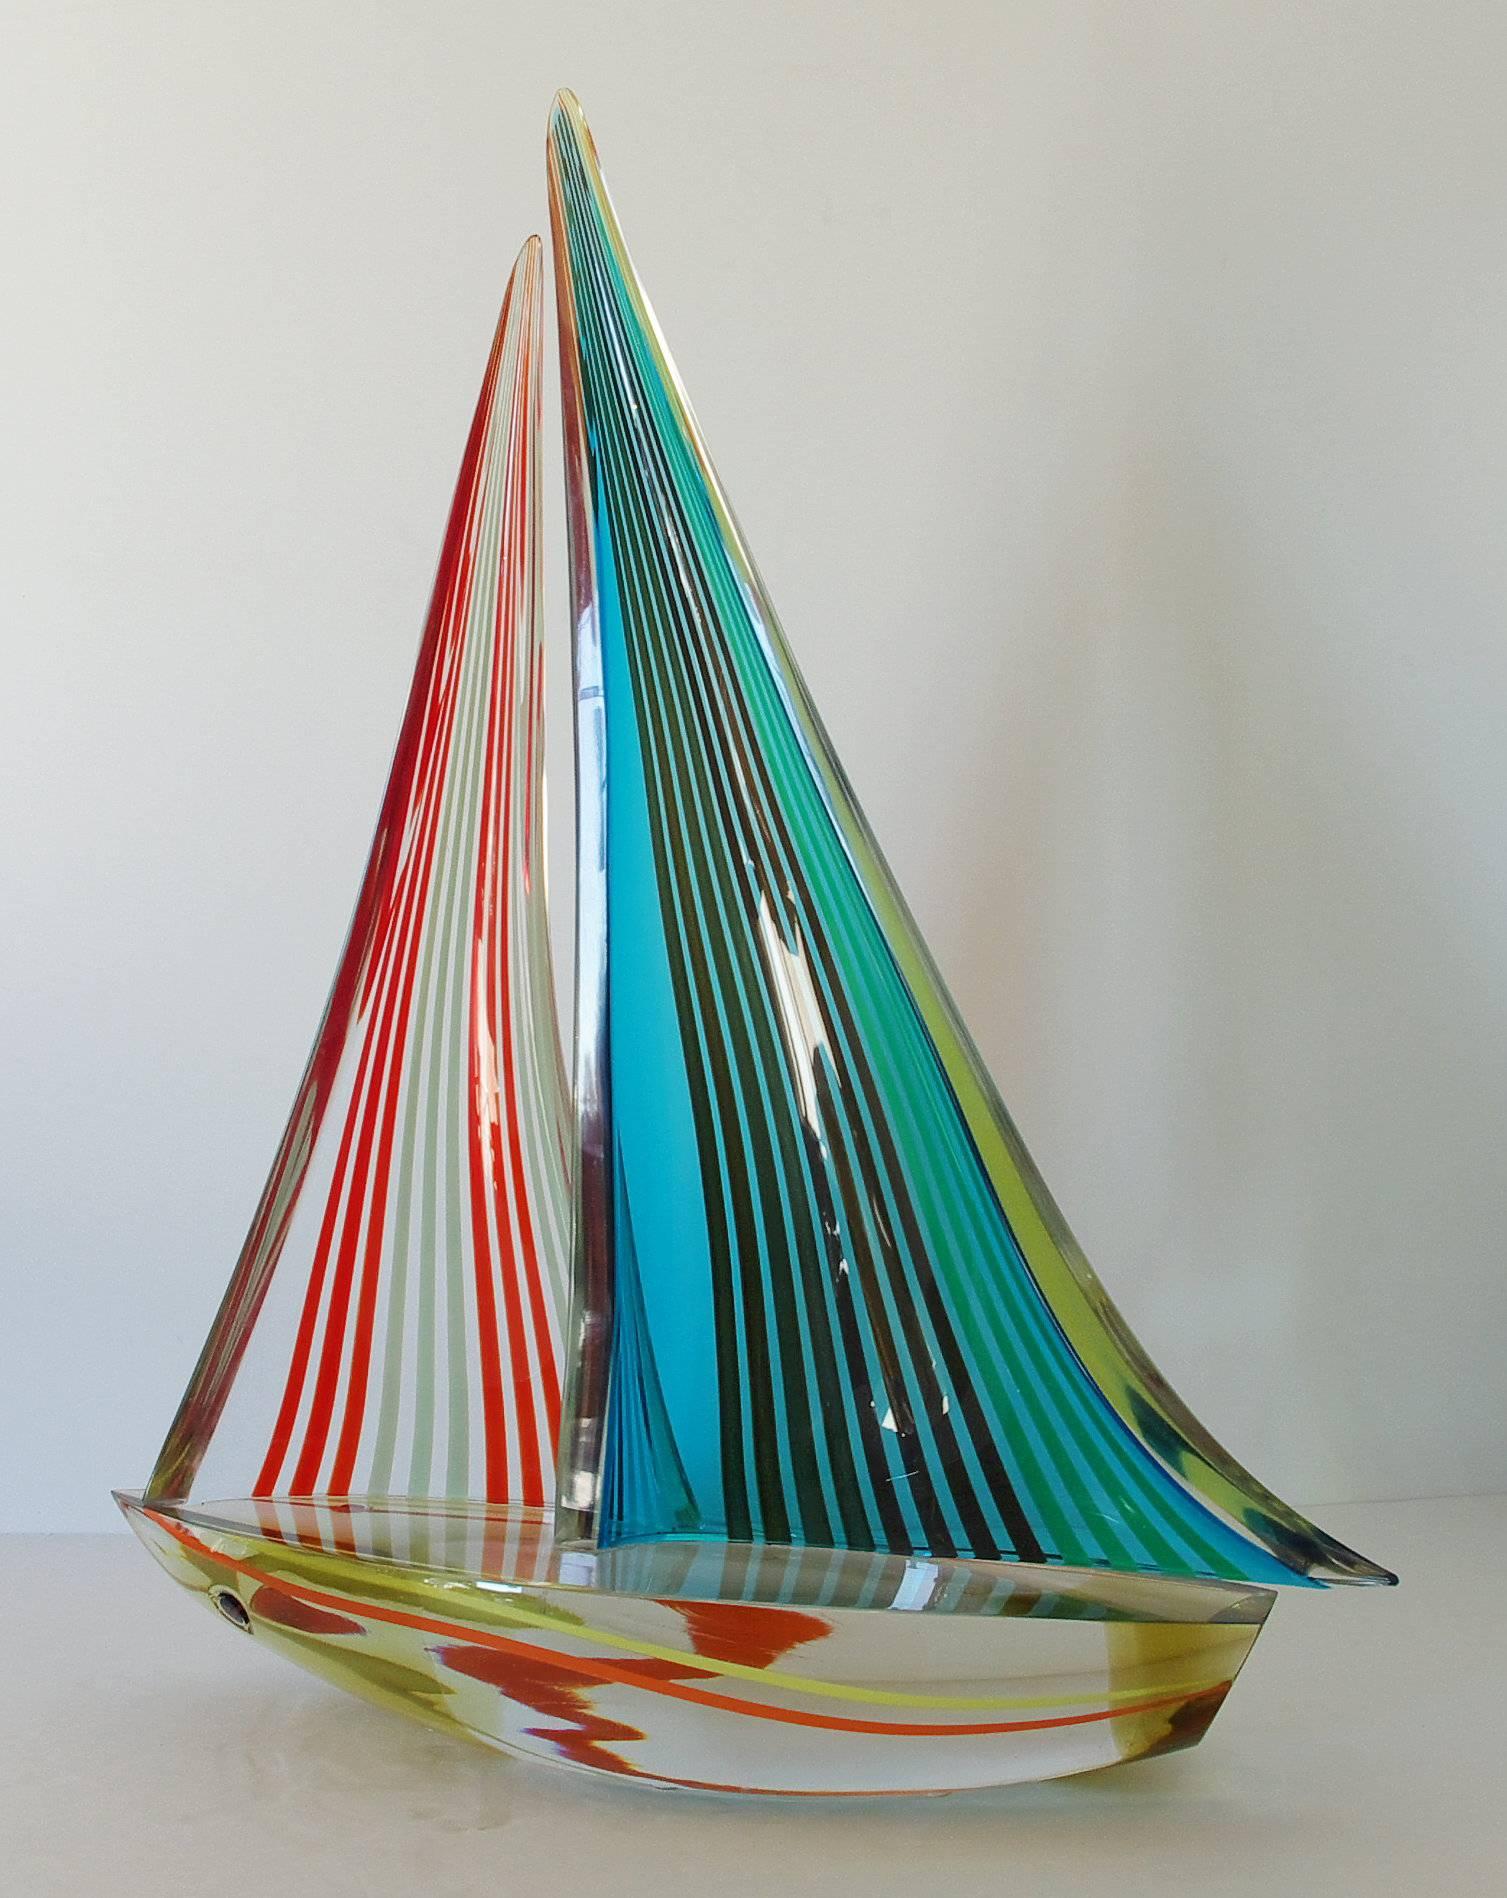 Vintage Italian double sail boat hand blown and crafted in multi color Murano glass by Alberto Dona'
Signed “Alberto Dona” on the base / Made in Italy in the 1980’s 
Height: 21 inches / Width: 17 inches / Depth: 6 inches 
1 in stock in Palm Springs